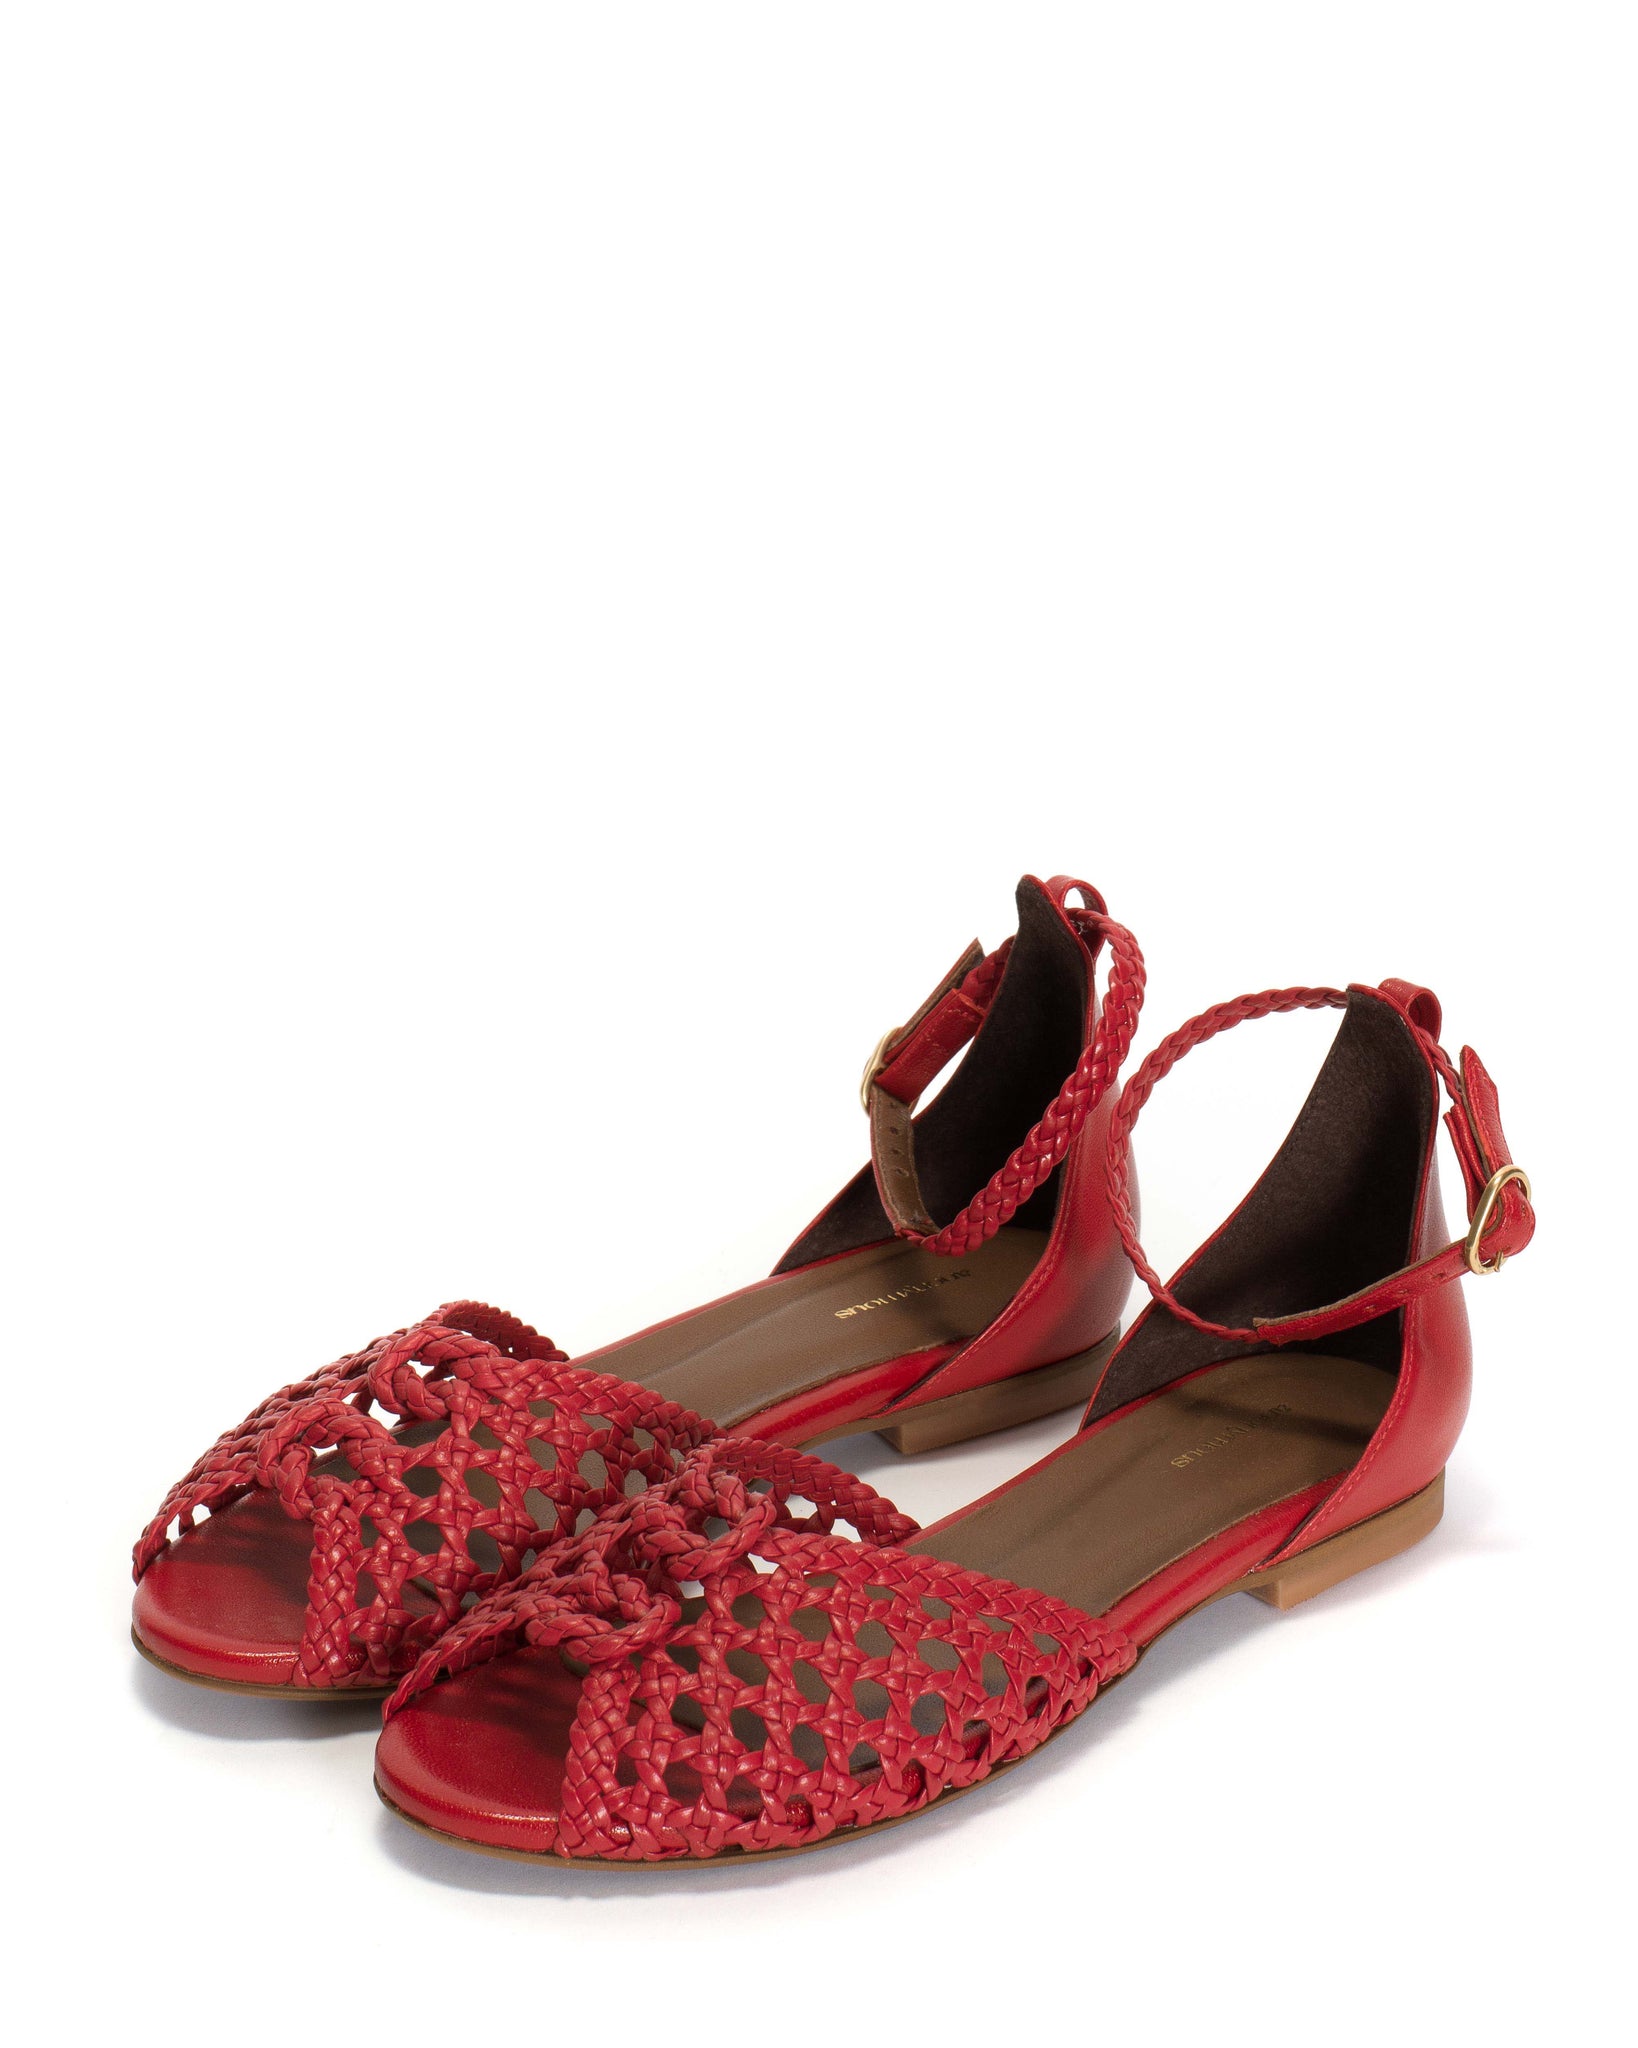 Lucy 10 Hand-braided leather Ruby red